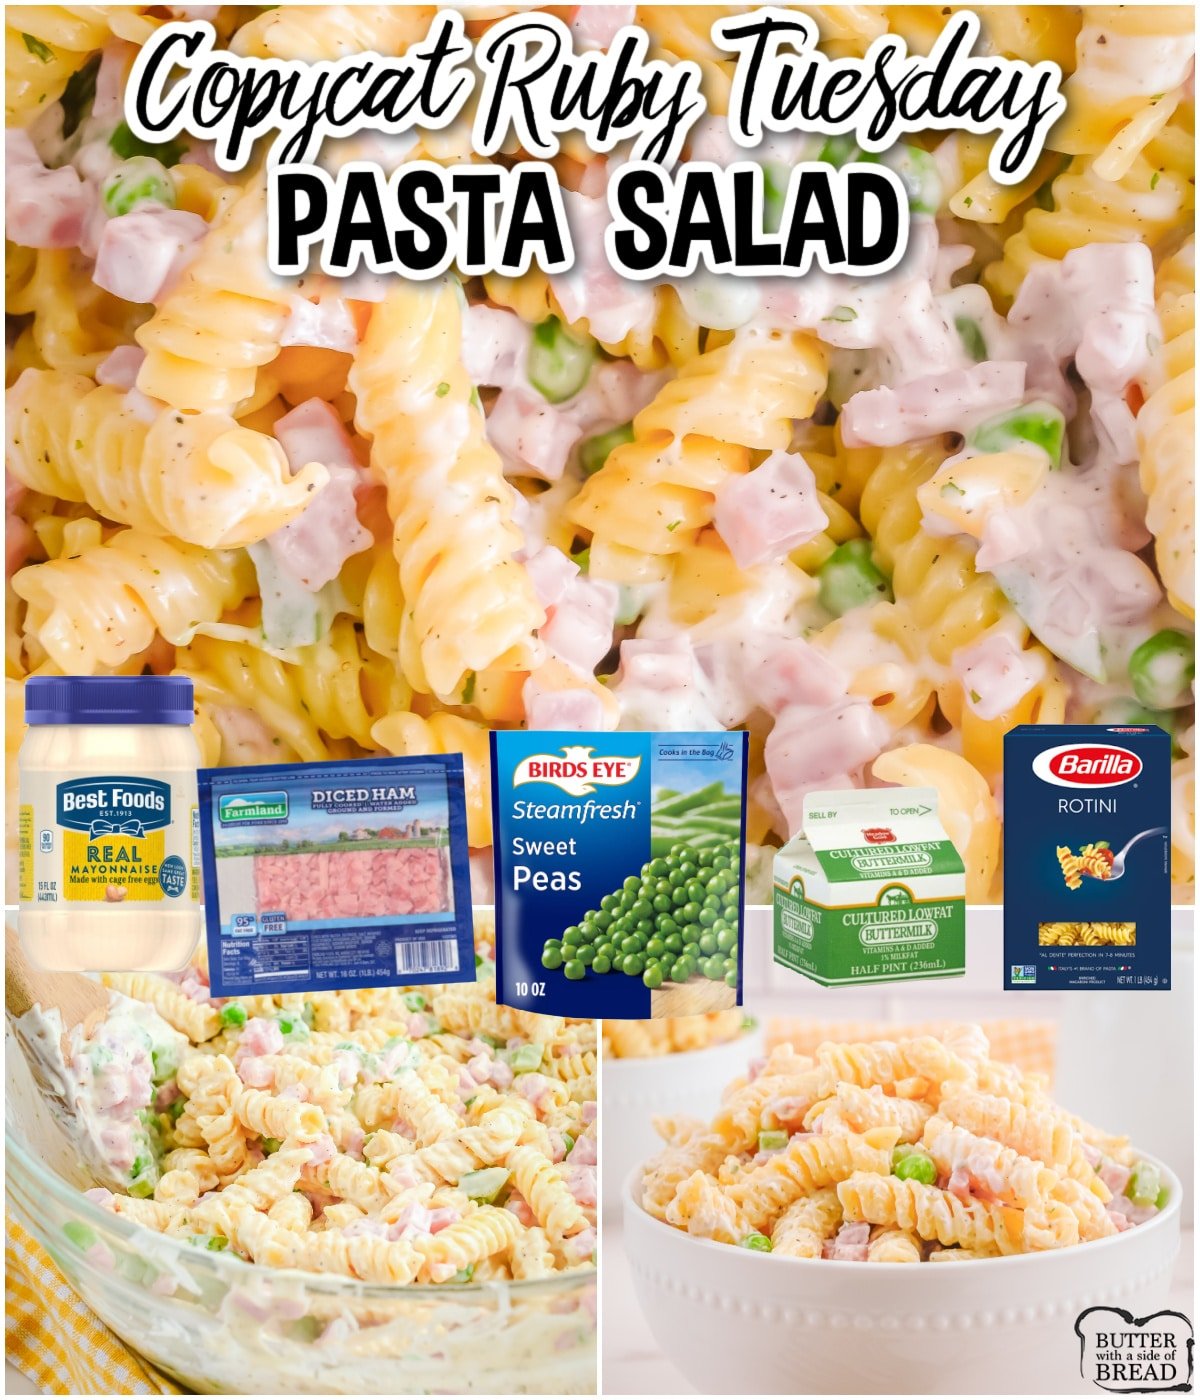 Copycat Ruby Tuesday Pasta Salad is simple pasta salad with ham, peas, peppers topped with a creamy ranch dressing that adds the perfect flavor! Pasta salad just like you get at Ruby Tuesday's restaurant! 